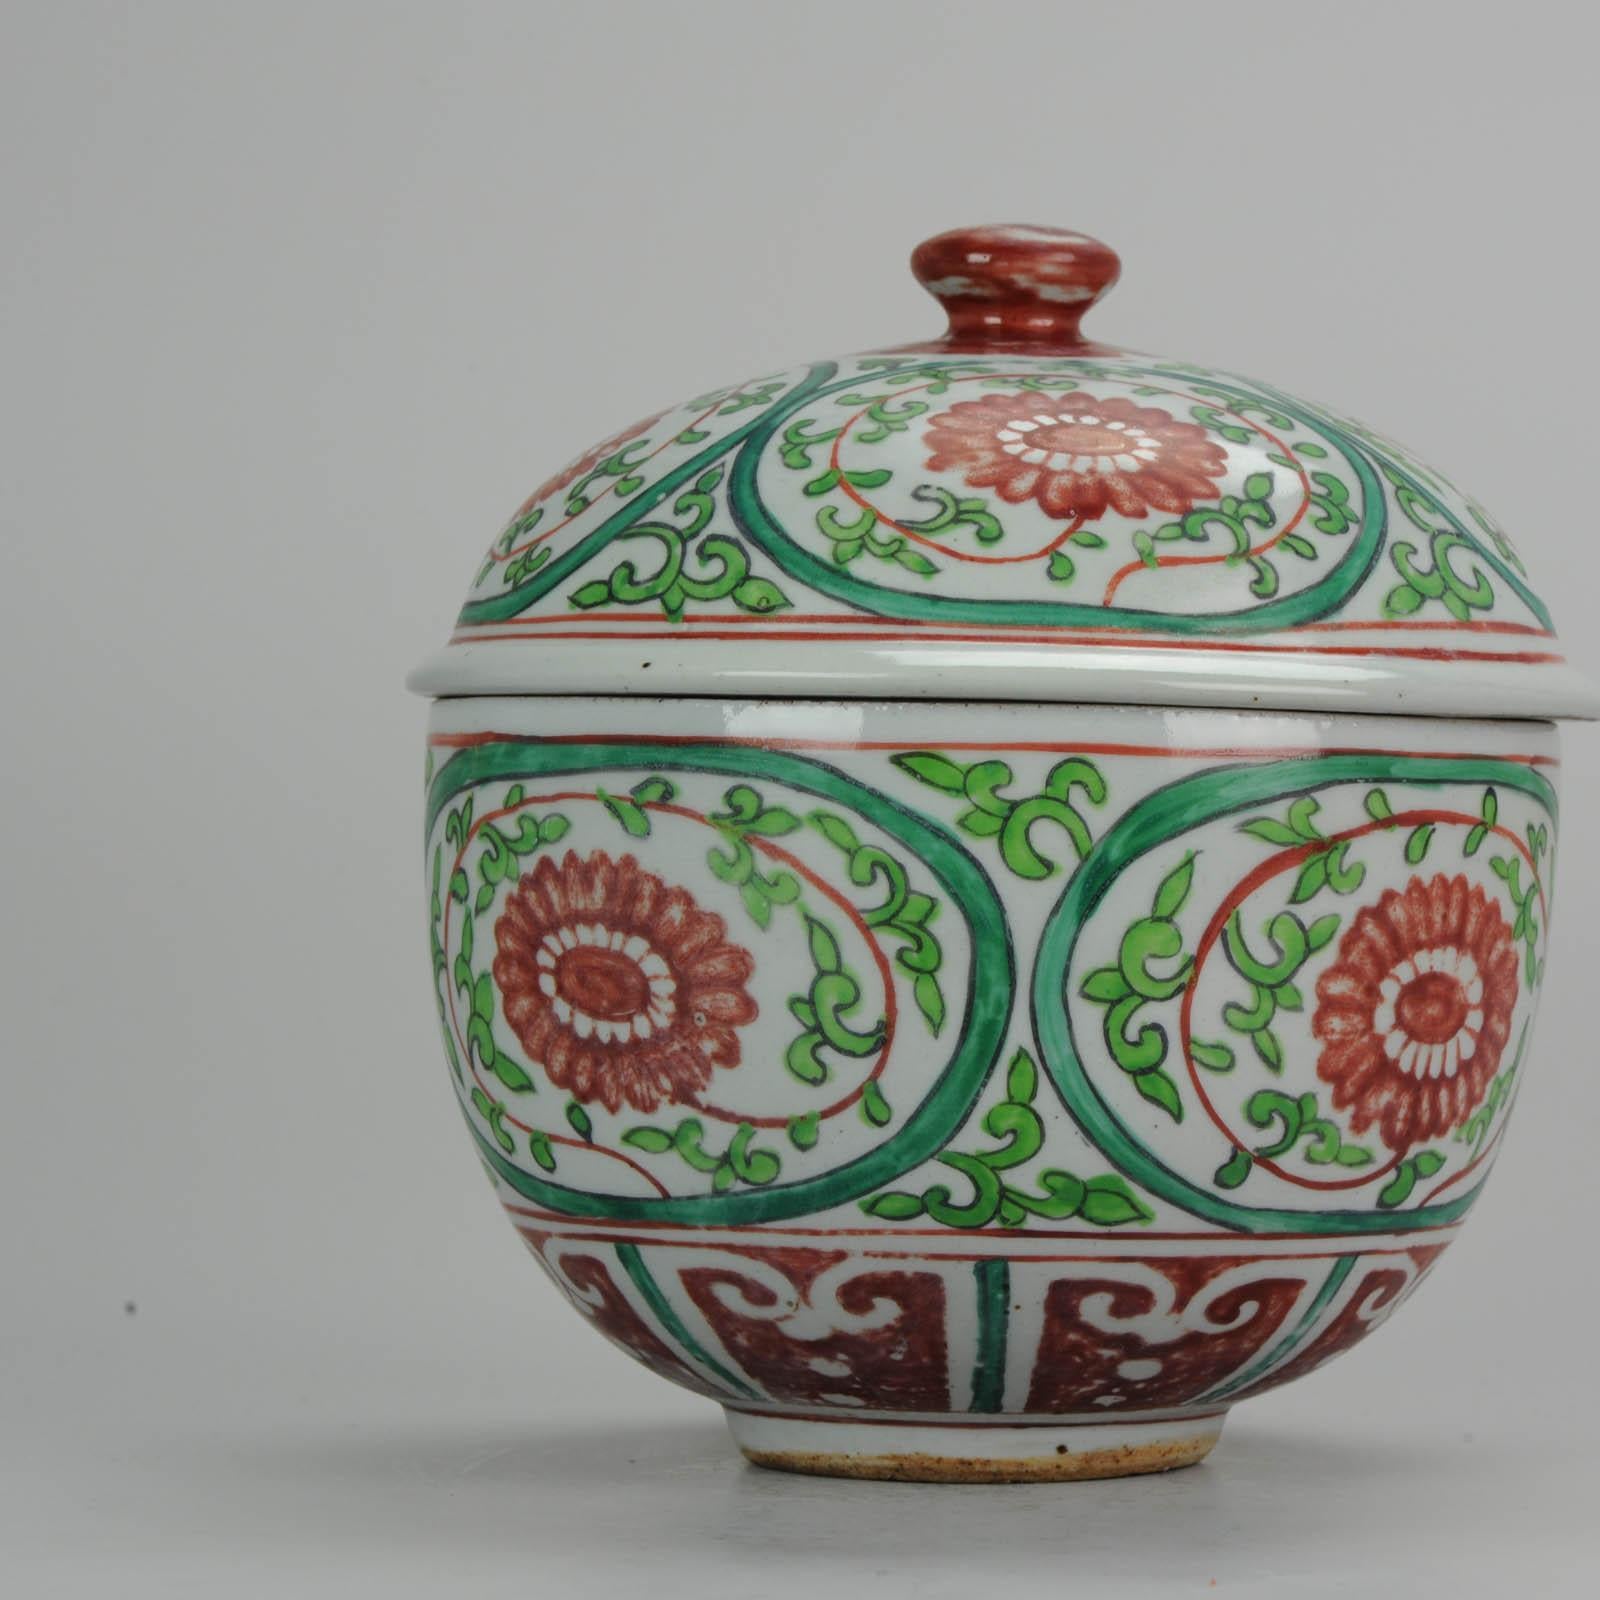 Antique Chinese Porcelain Jar 18th Century SE Asian Thai Market Bencharong Peony For Sale 4